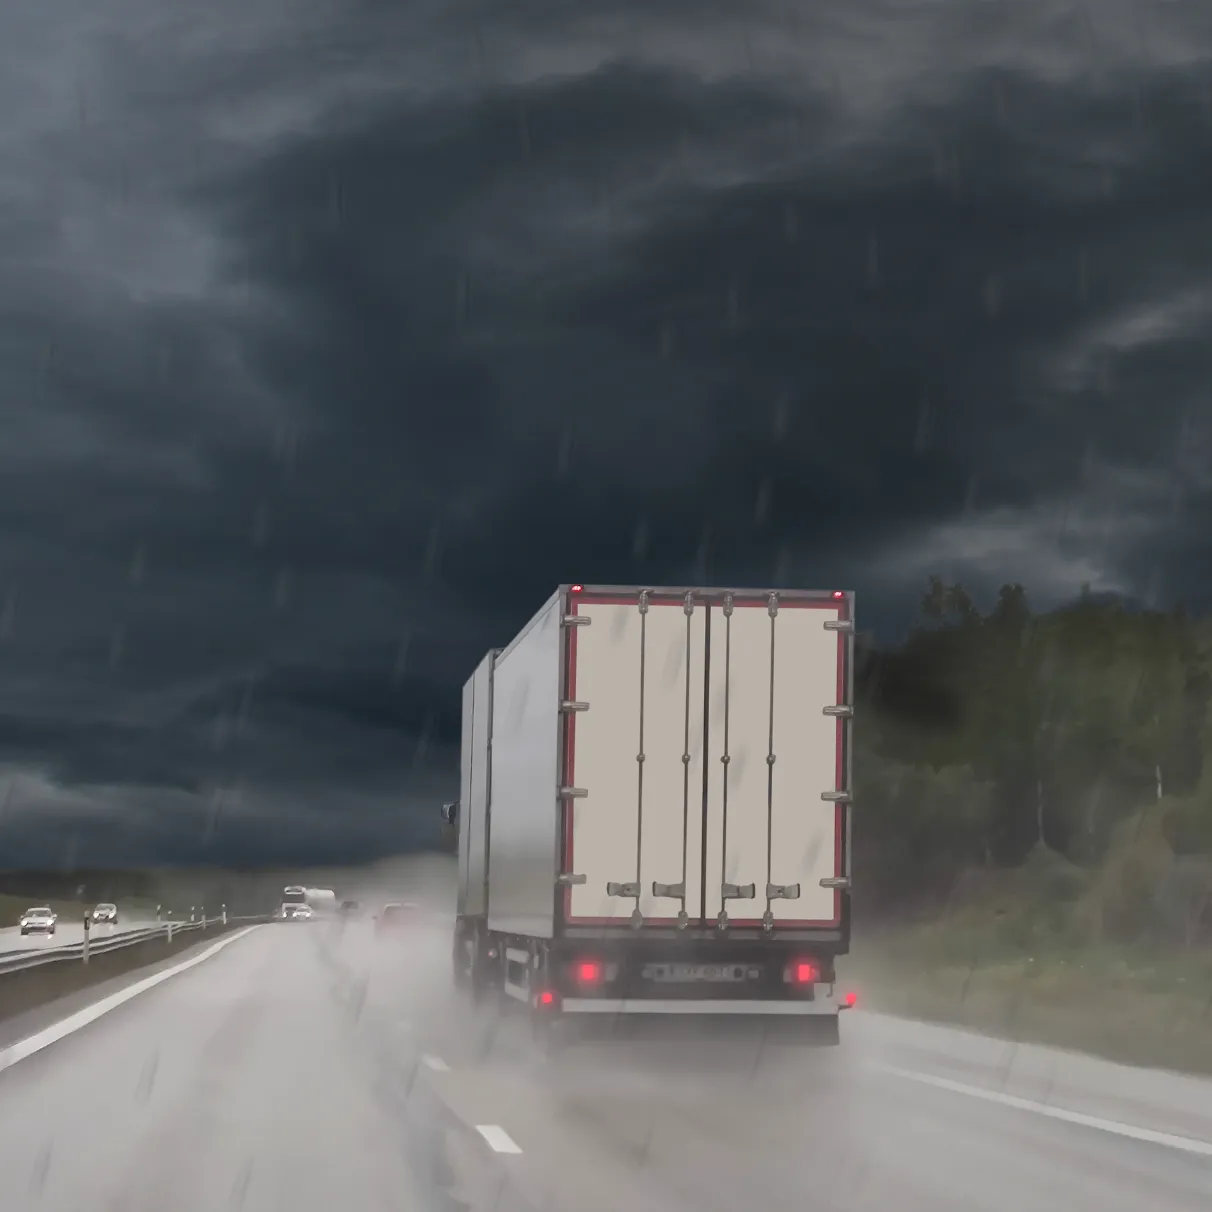 A commercial truck driving on the highway into a rainstorm.